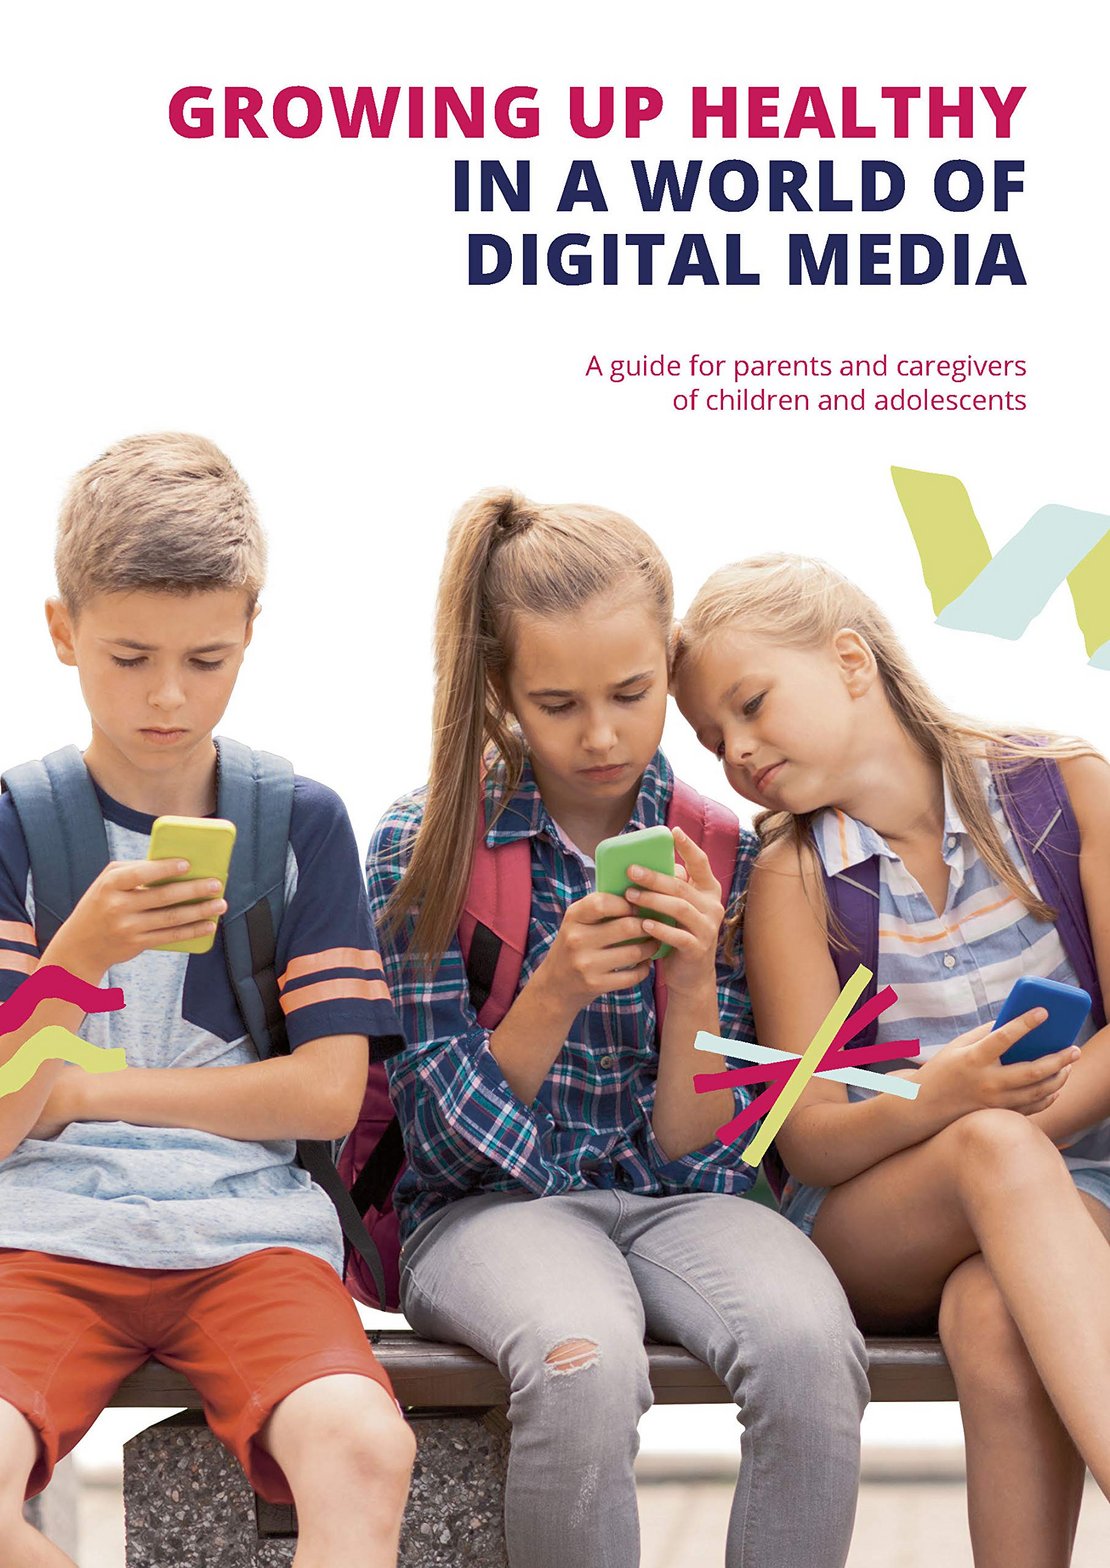 [Translate to English:] Growing up healthy in a World of Digital Media